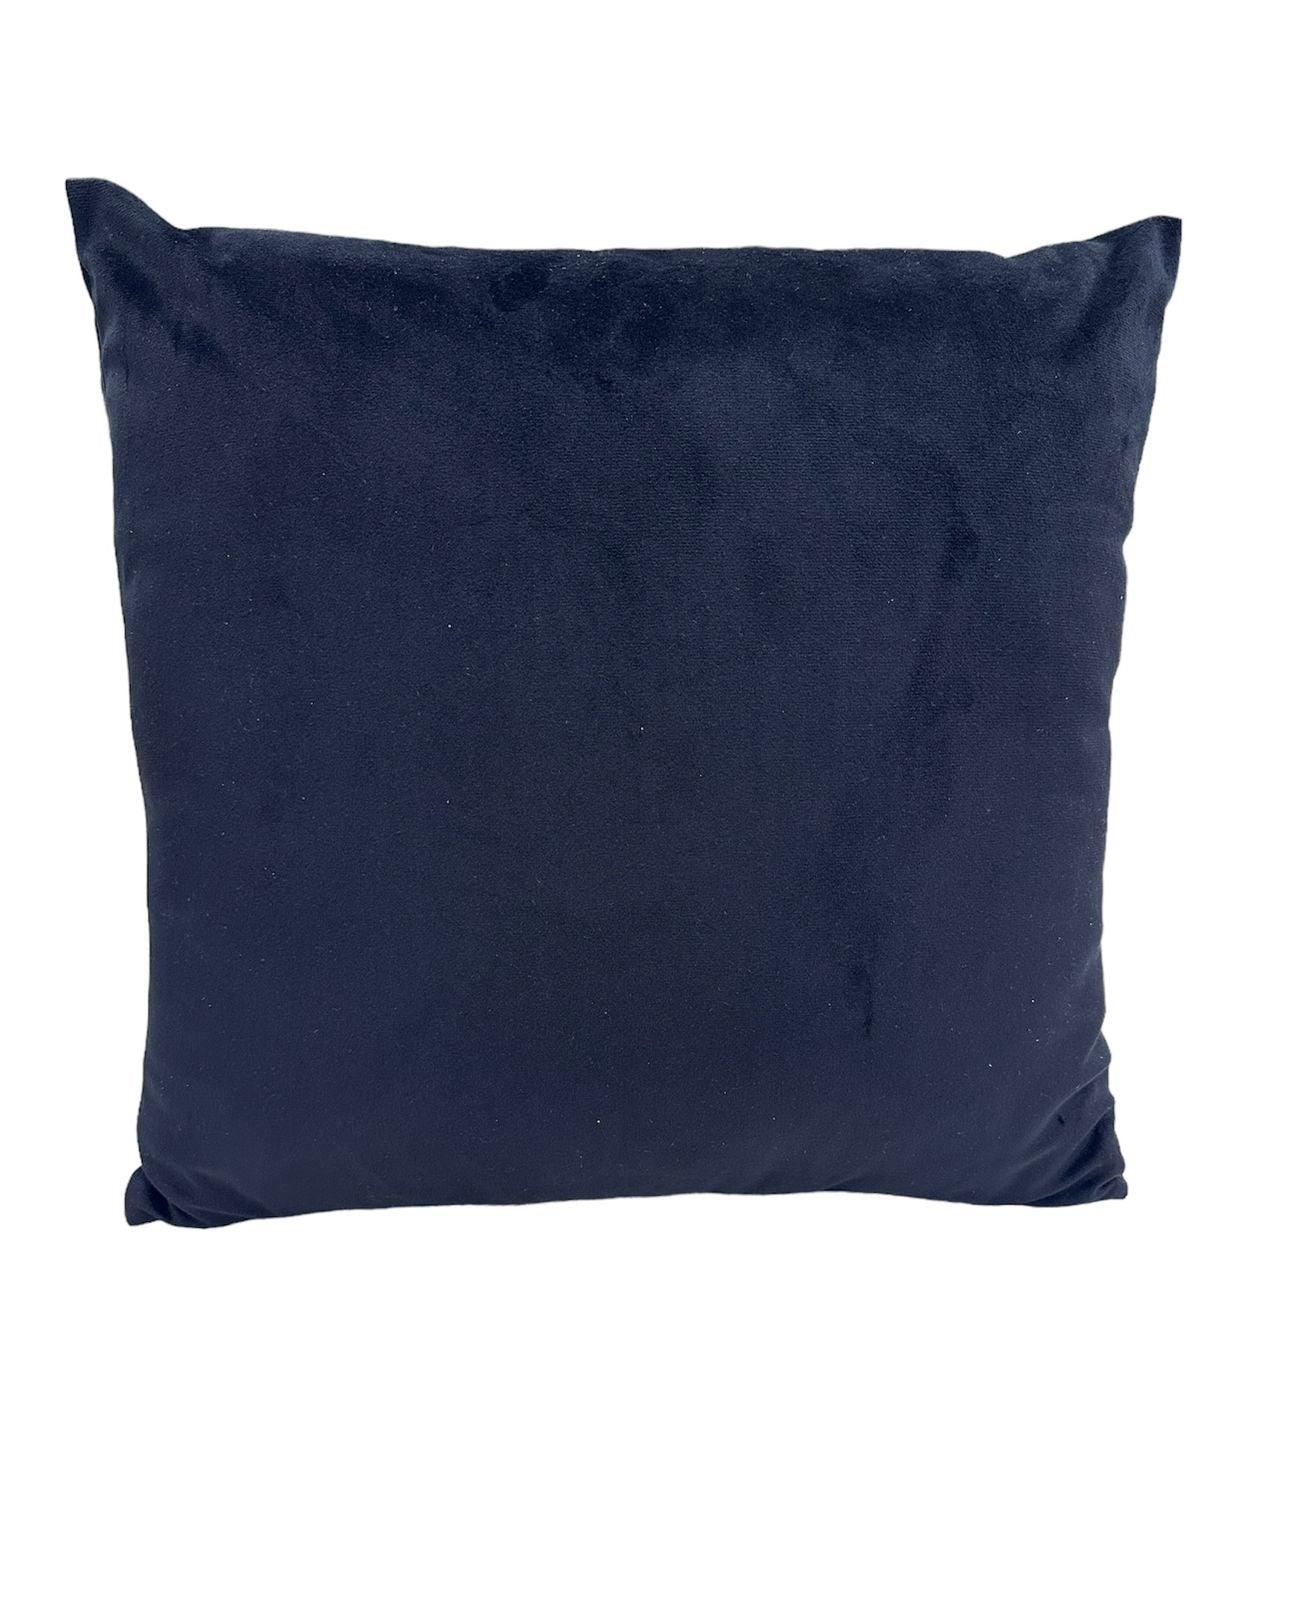 Velvet Cushion, a durable and comfortable cushion cover for any occasion. Available in various designs and sizes. Sold per piece.